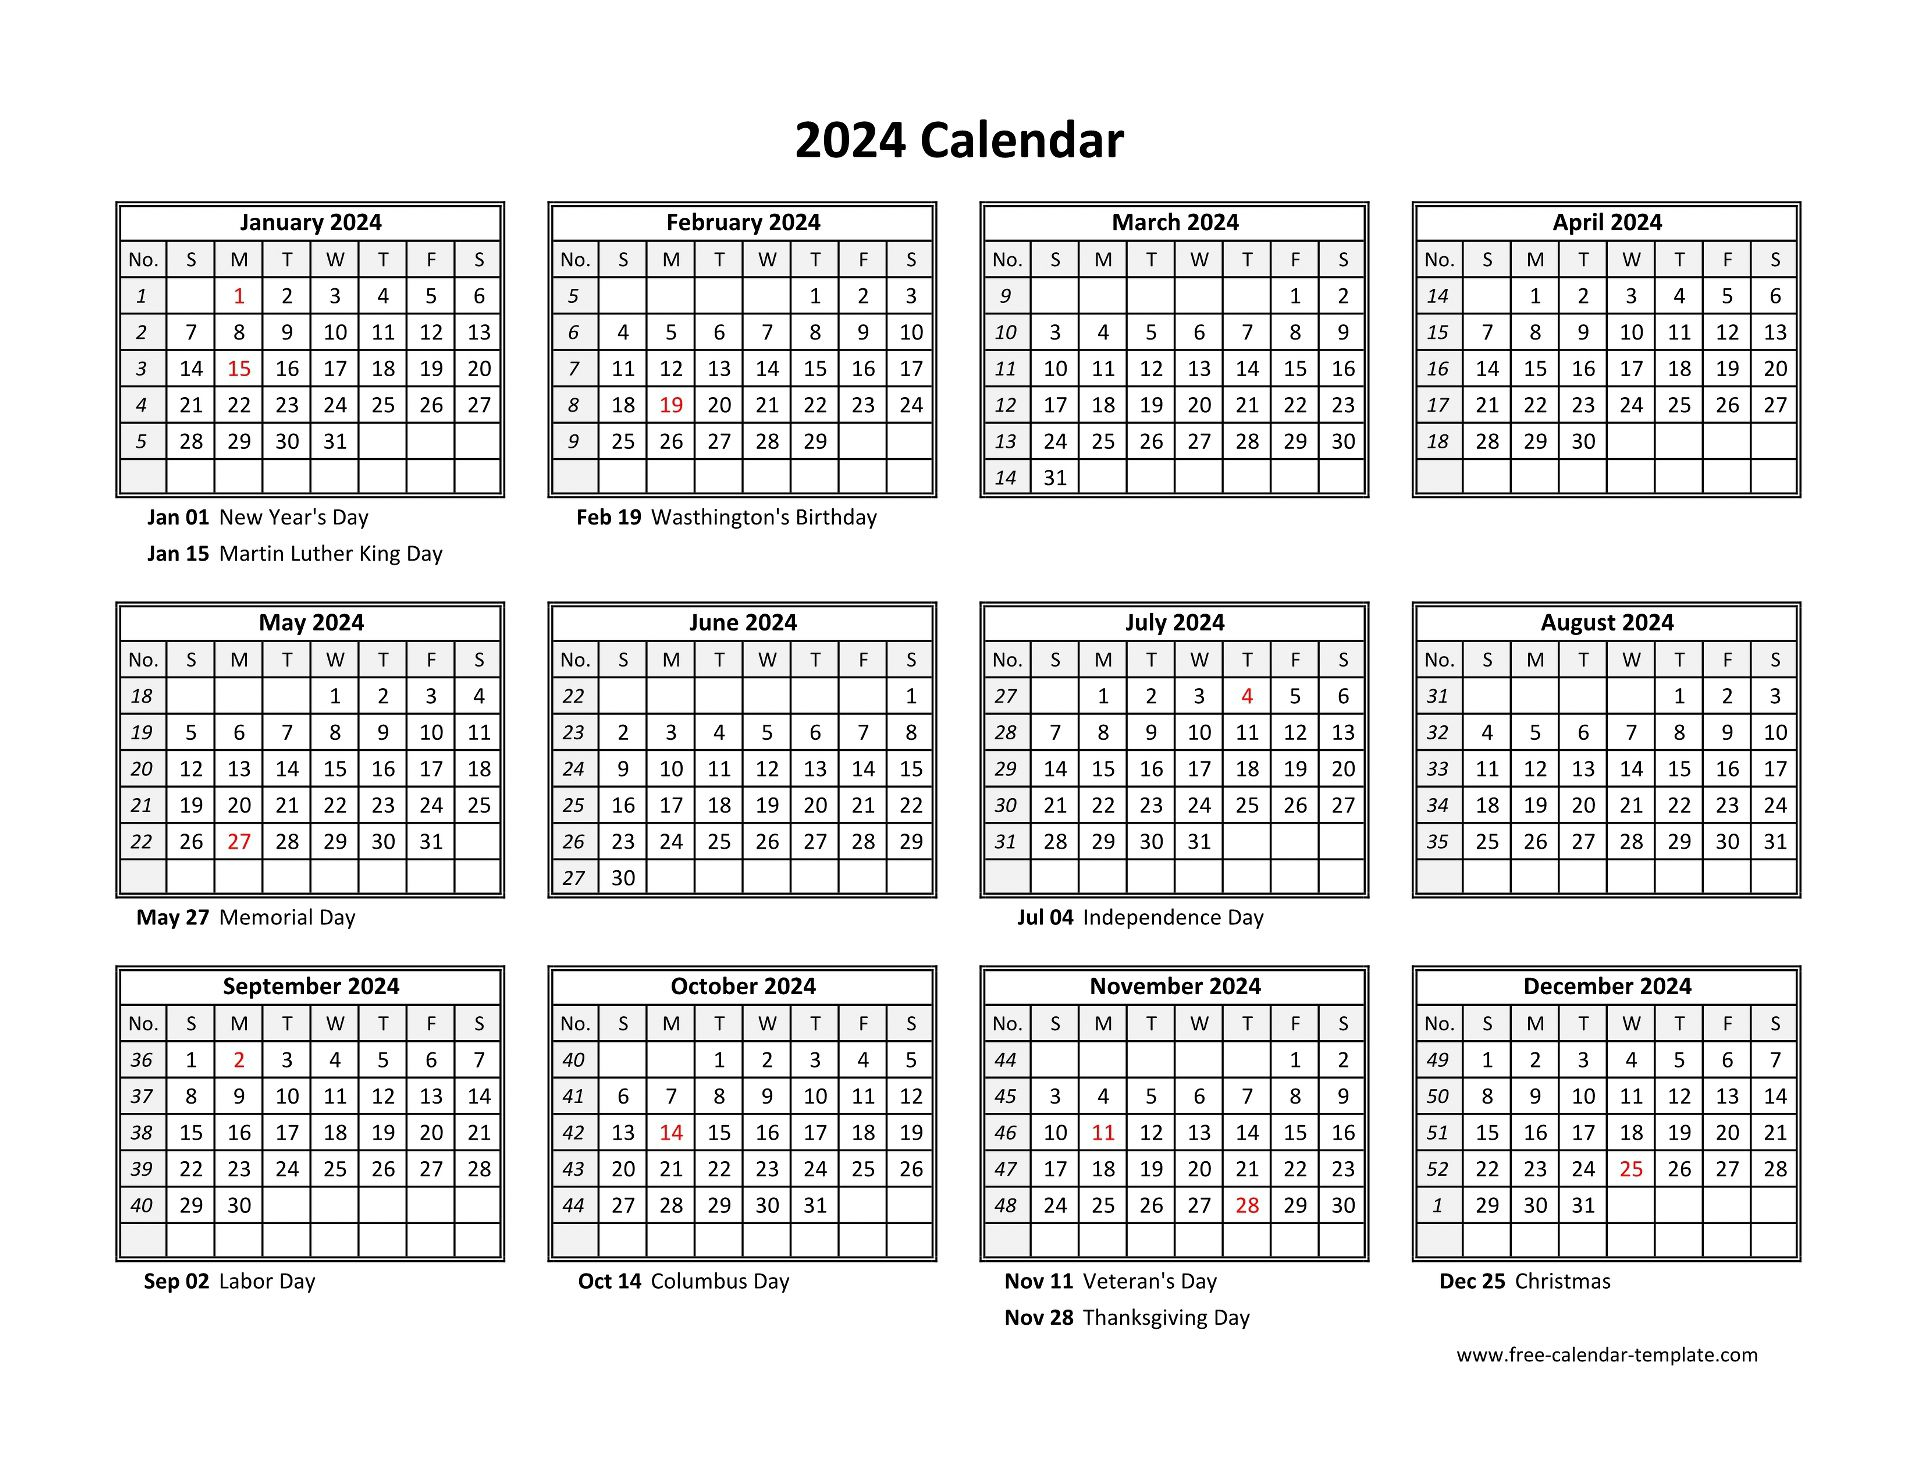 Yearly Calendar 2024 Printable With Federal Holidays | Free for 2024 Calendar Printable No Download